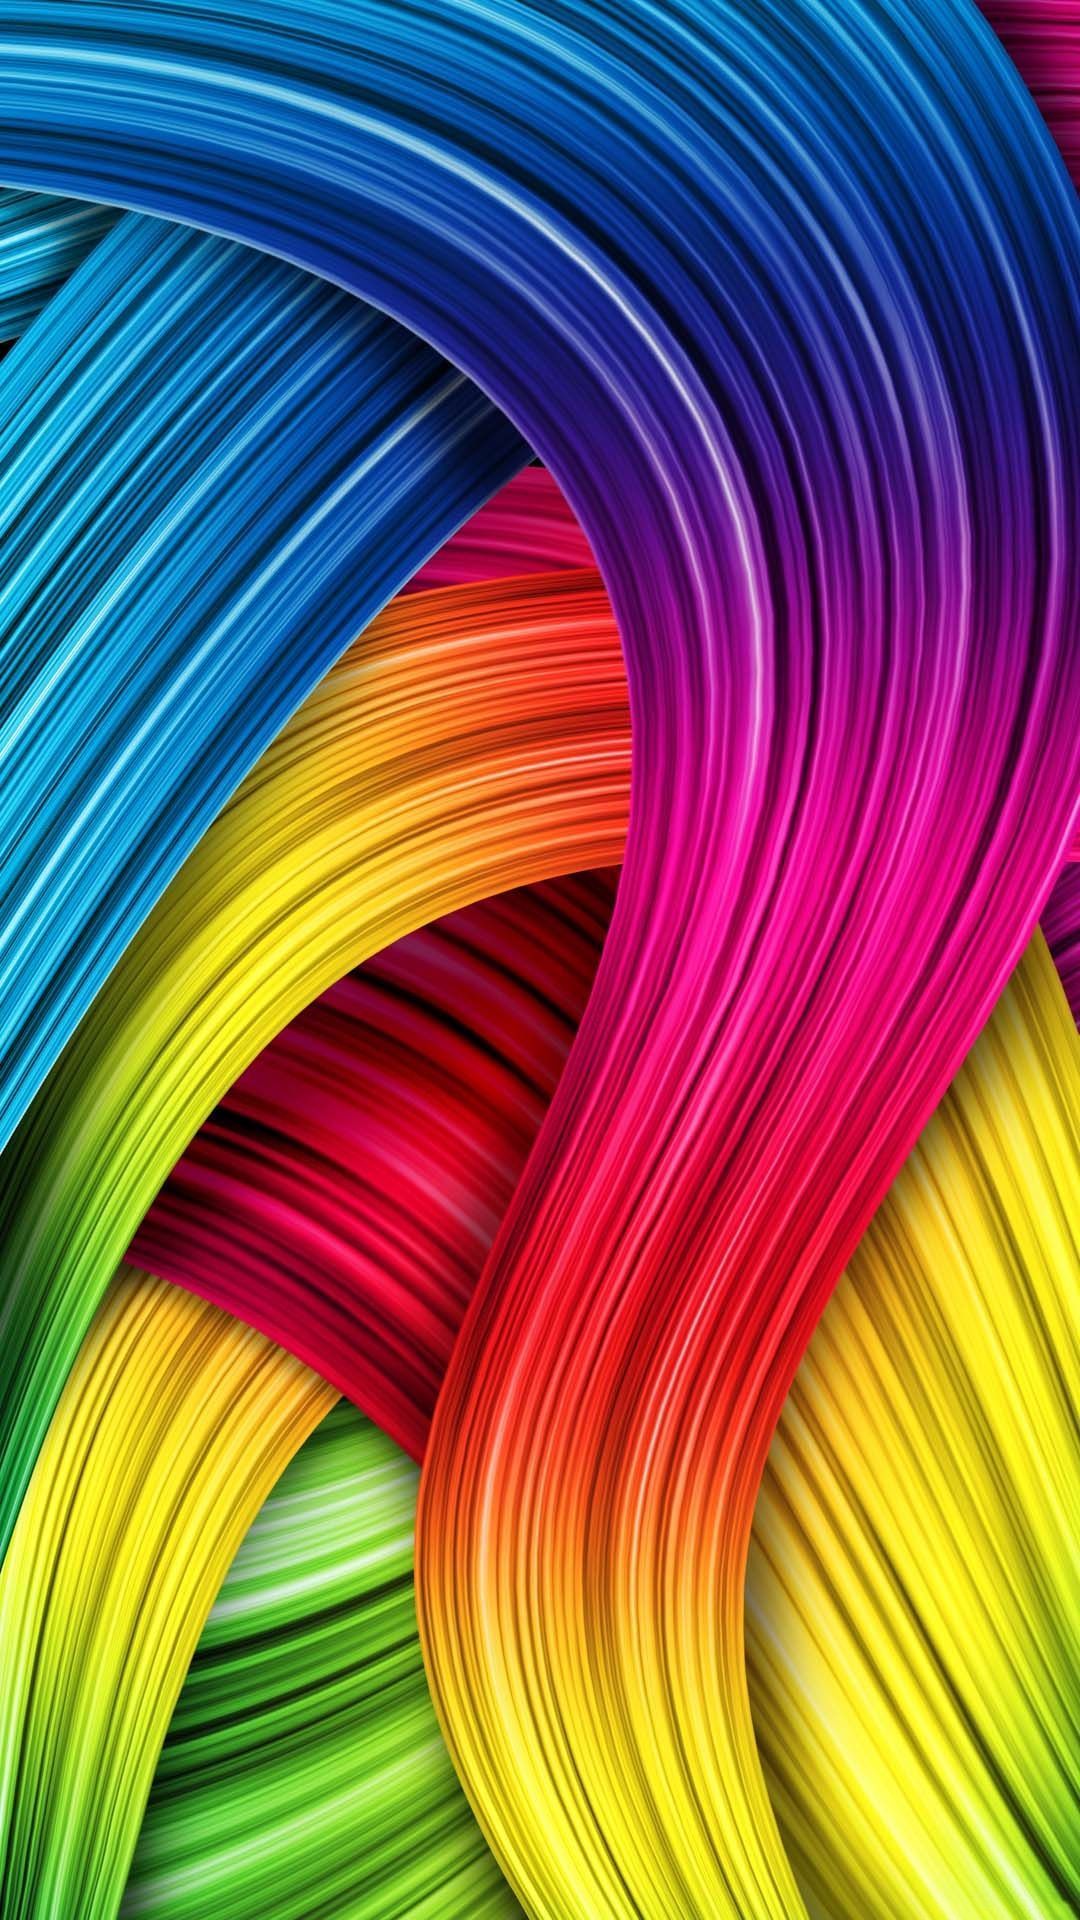 Wallpapers for Samsung Galaxy S4 - Thousands of HD Wallpapers for